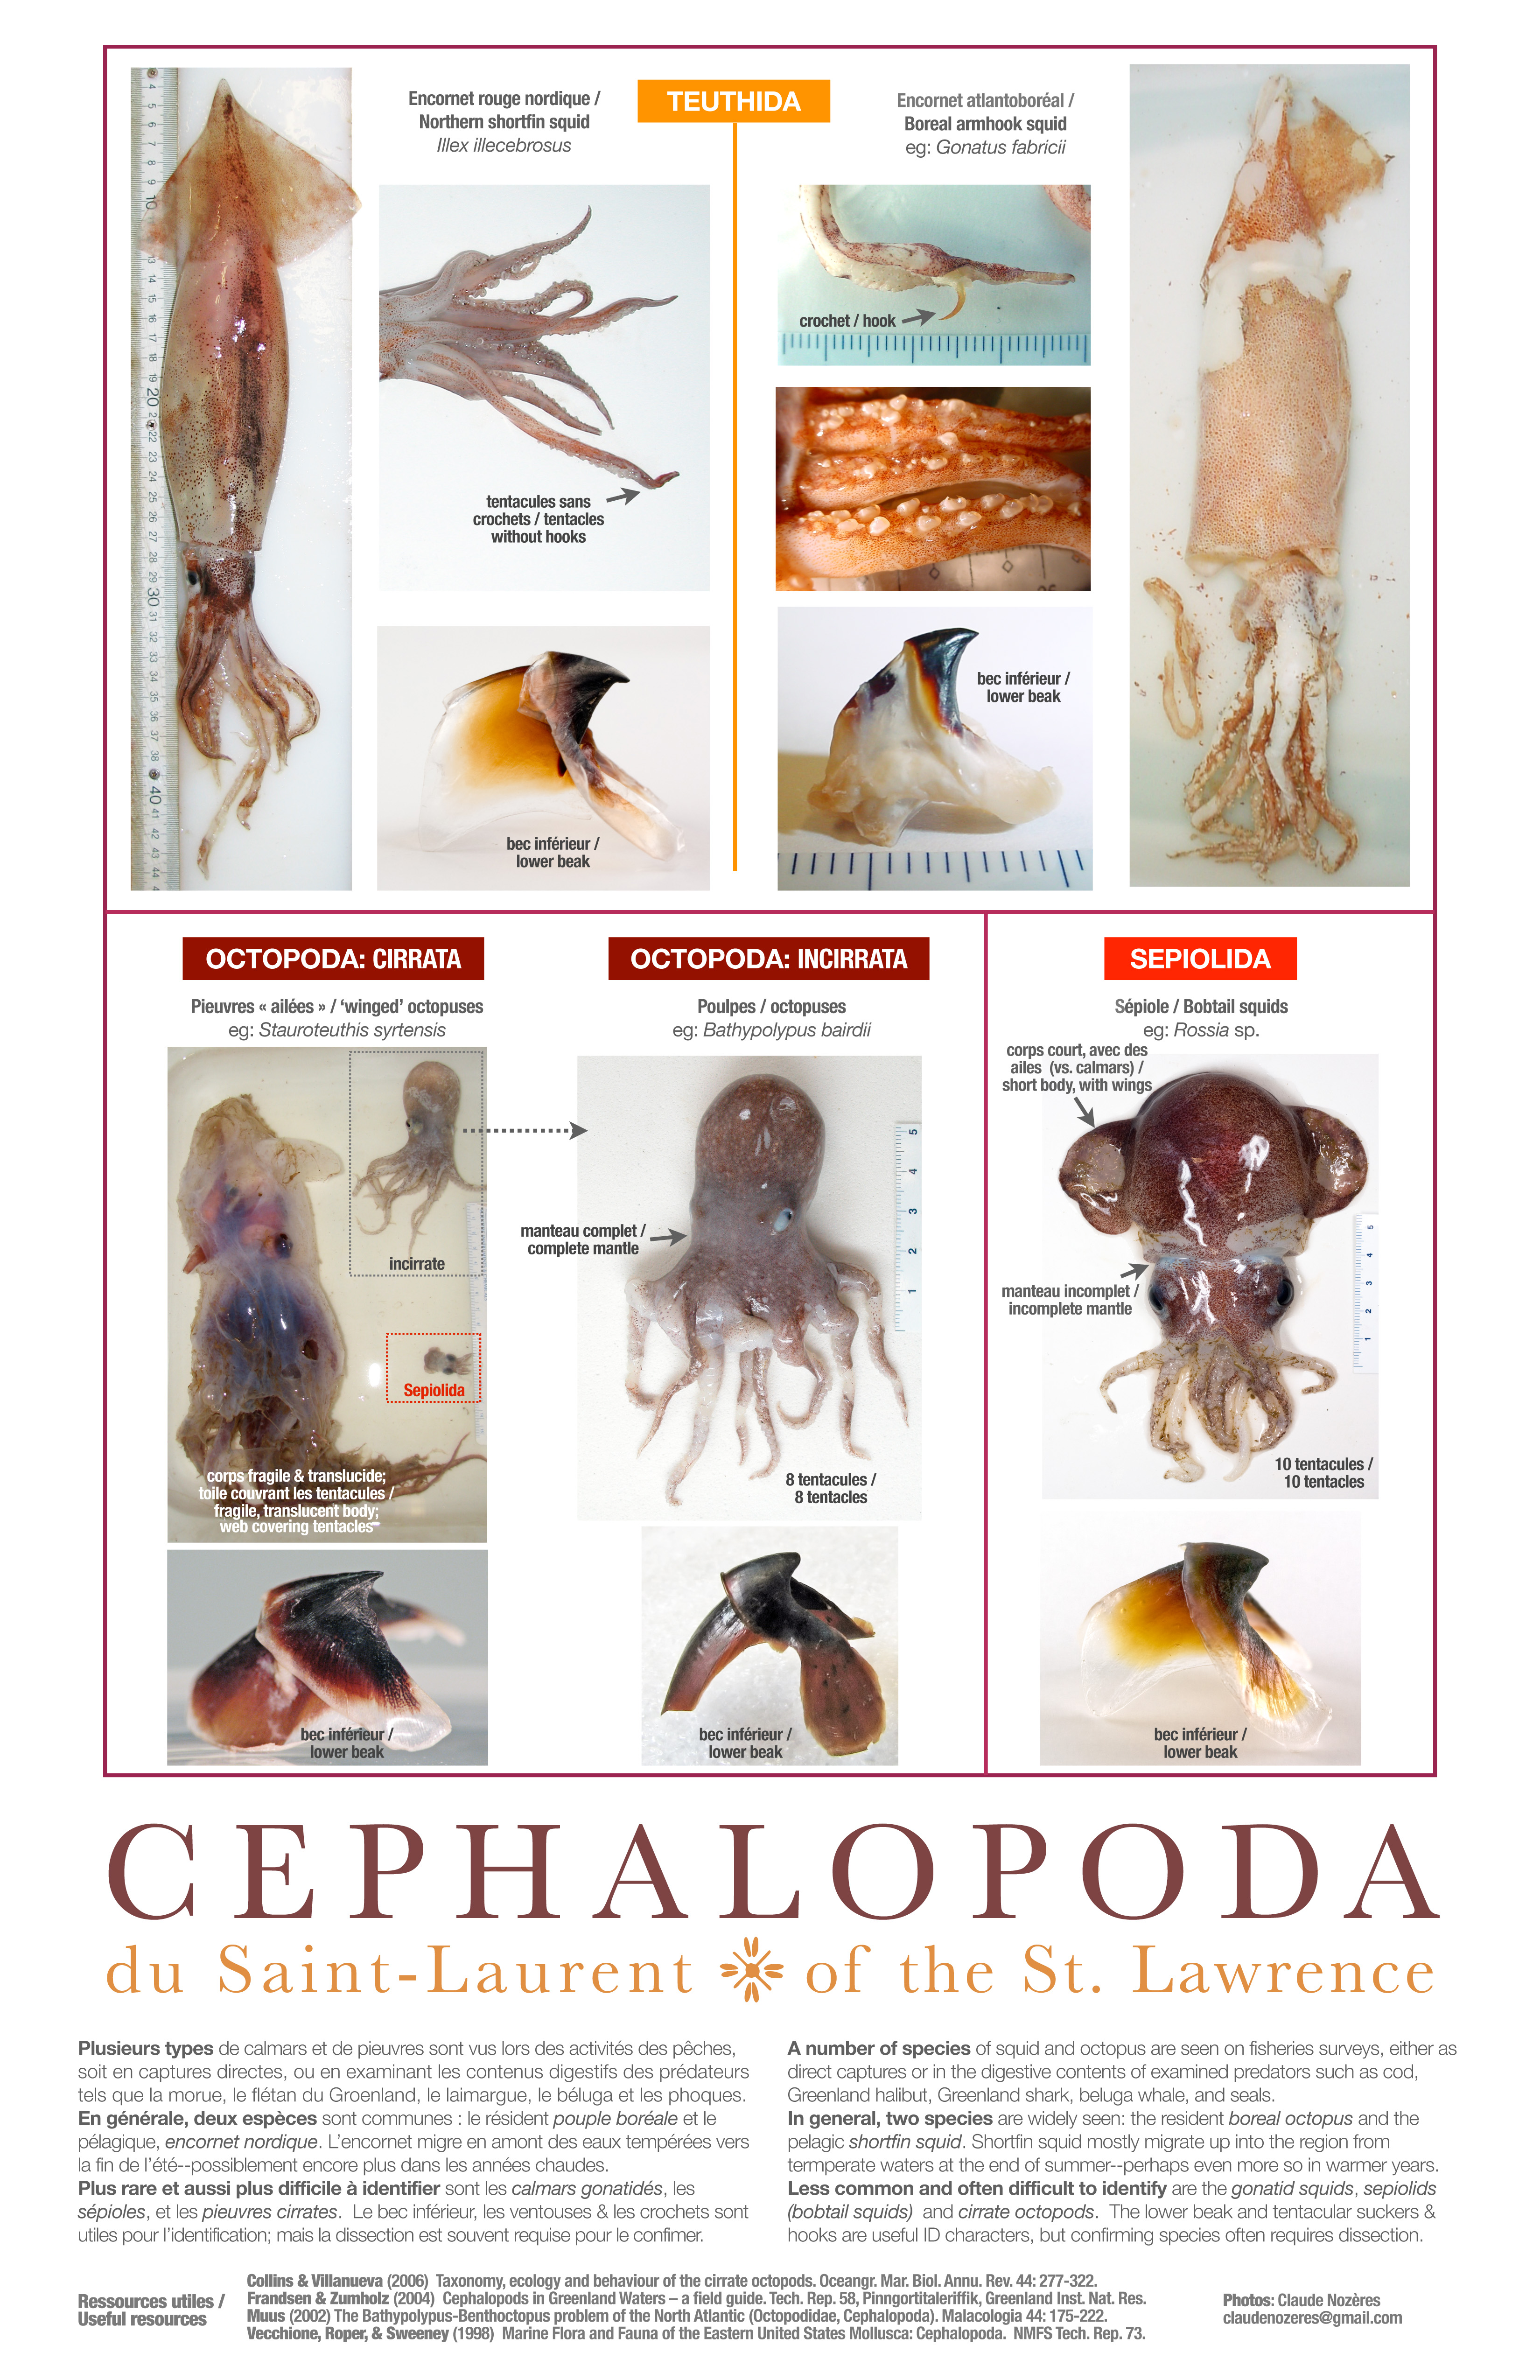 Cephalopods of the St. Lawrence